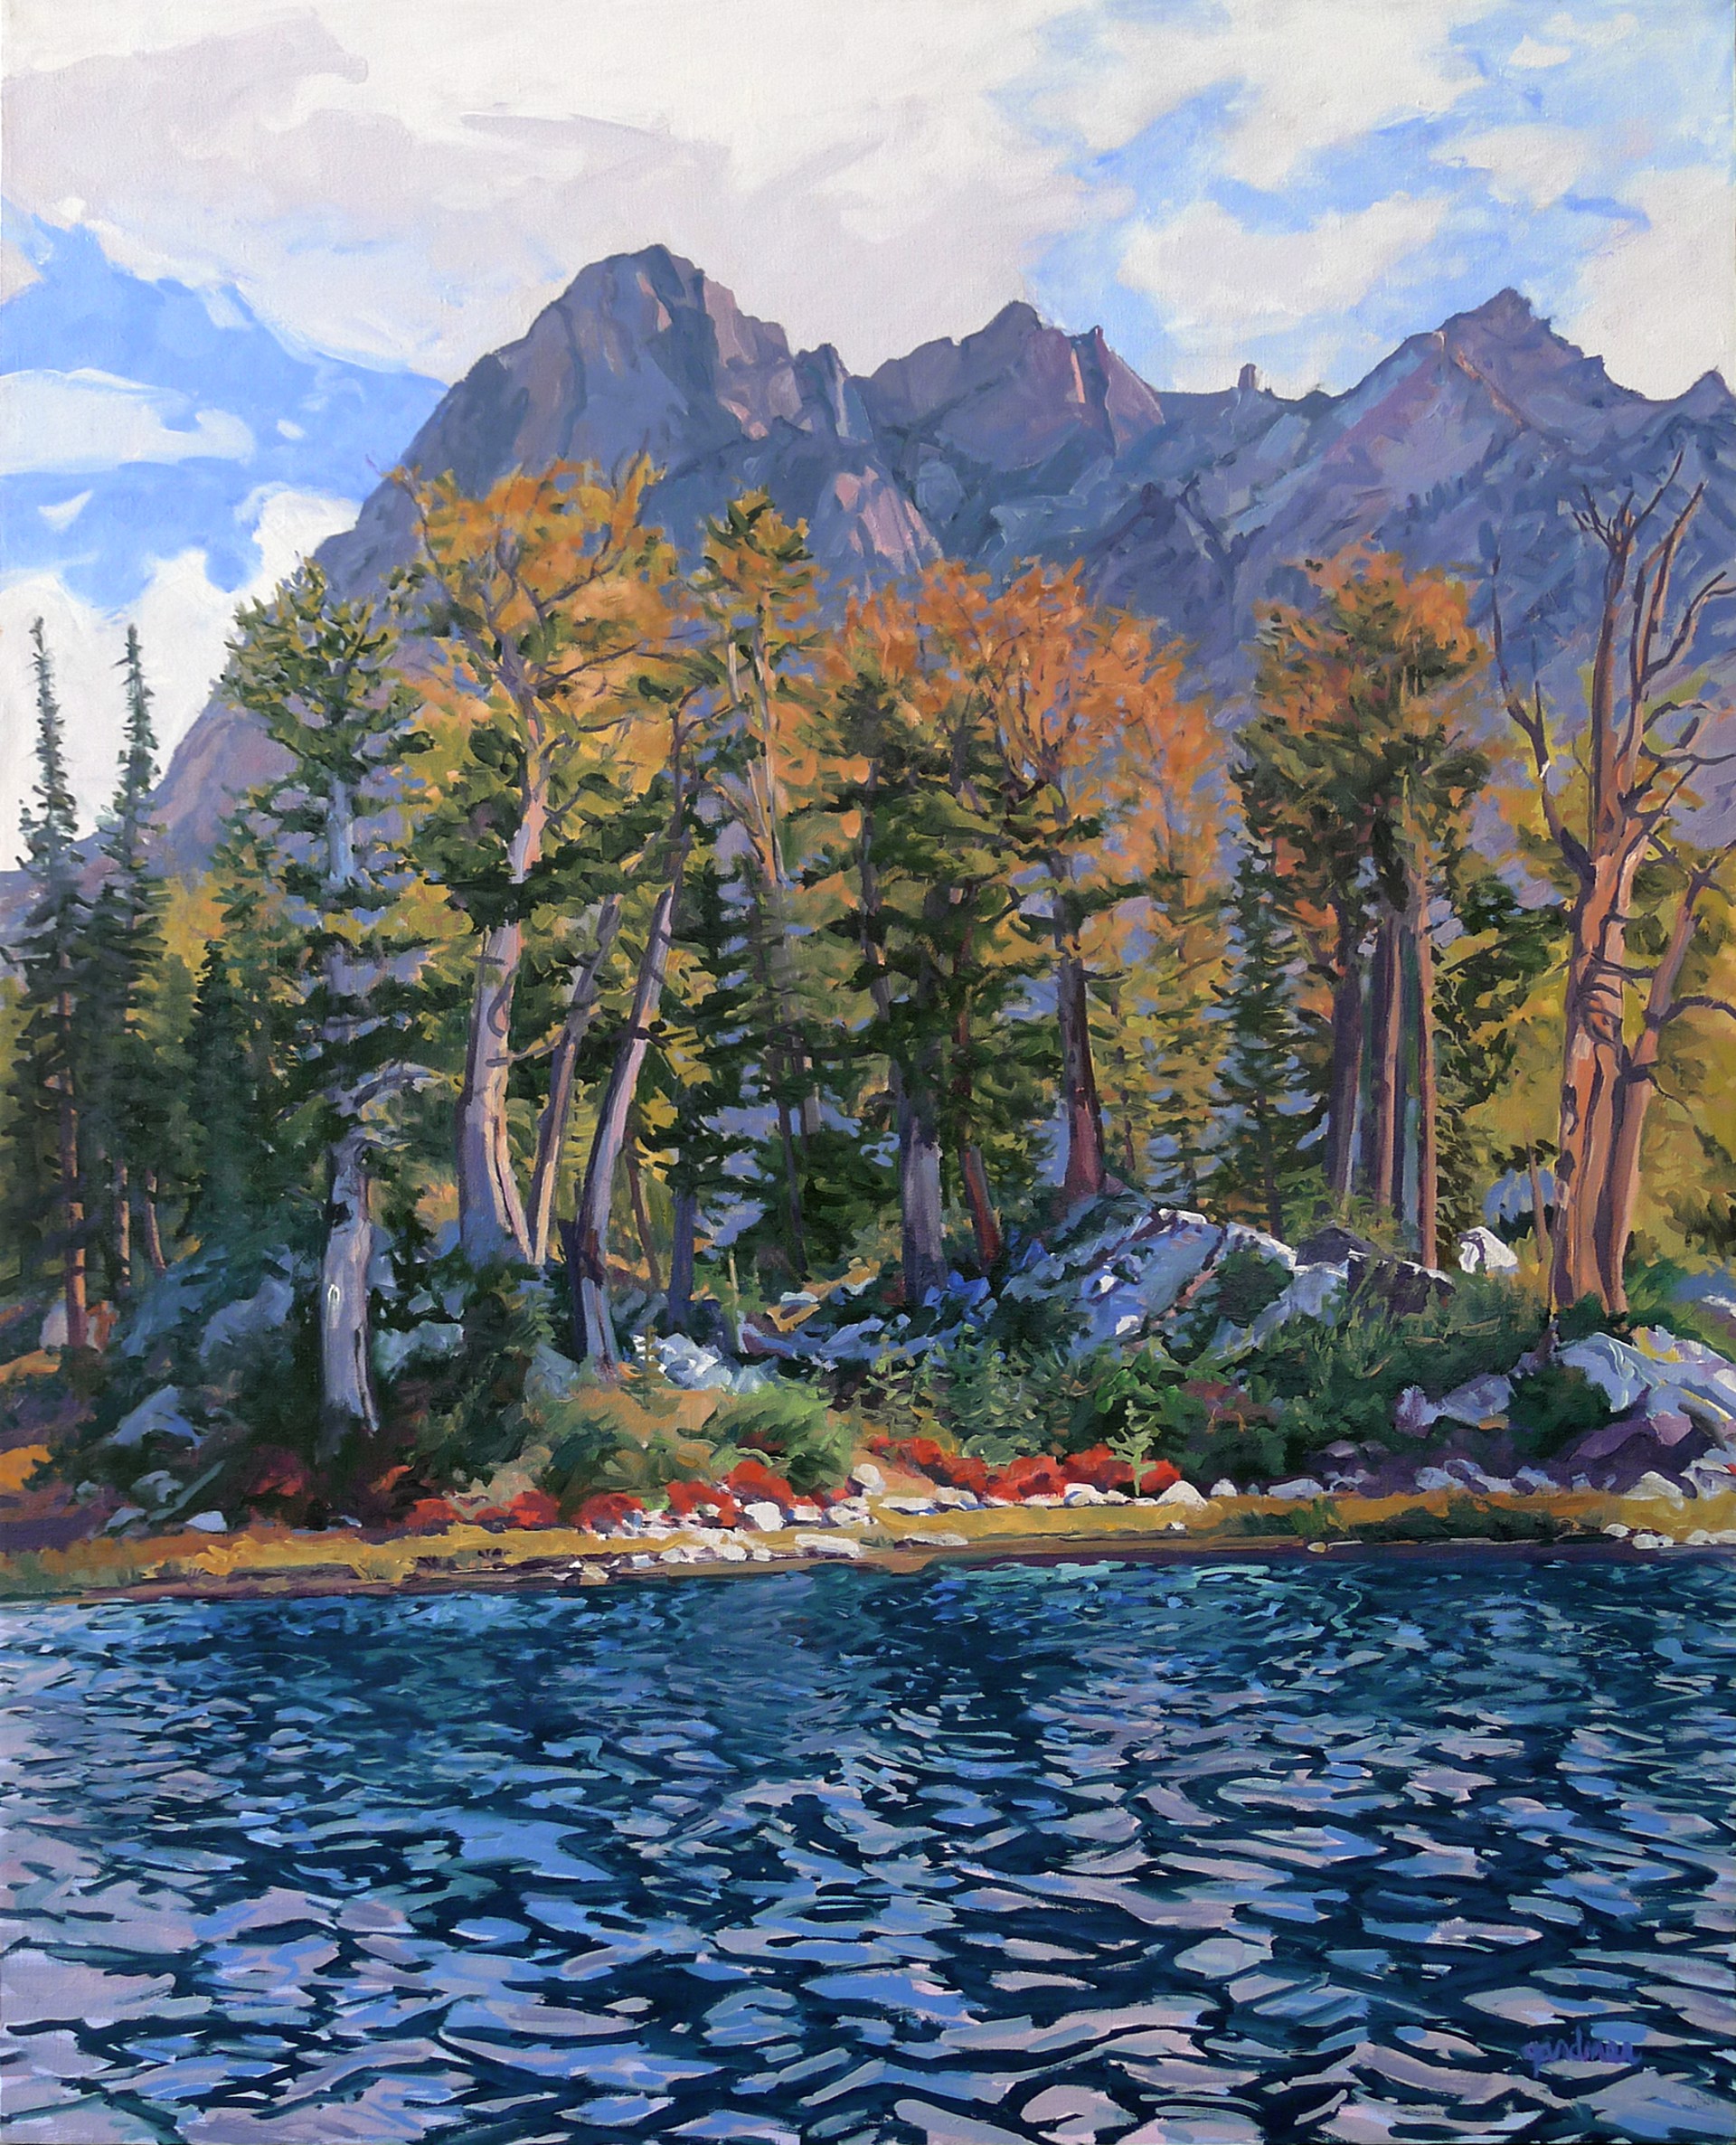 Wind on the Water (Alice Lake) by Sheila Gardner